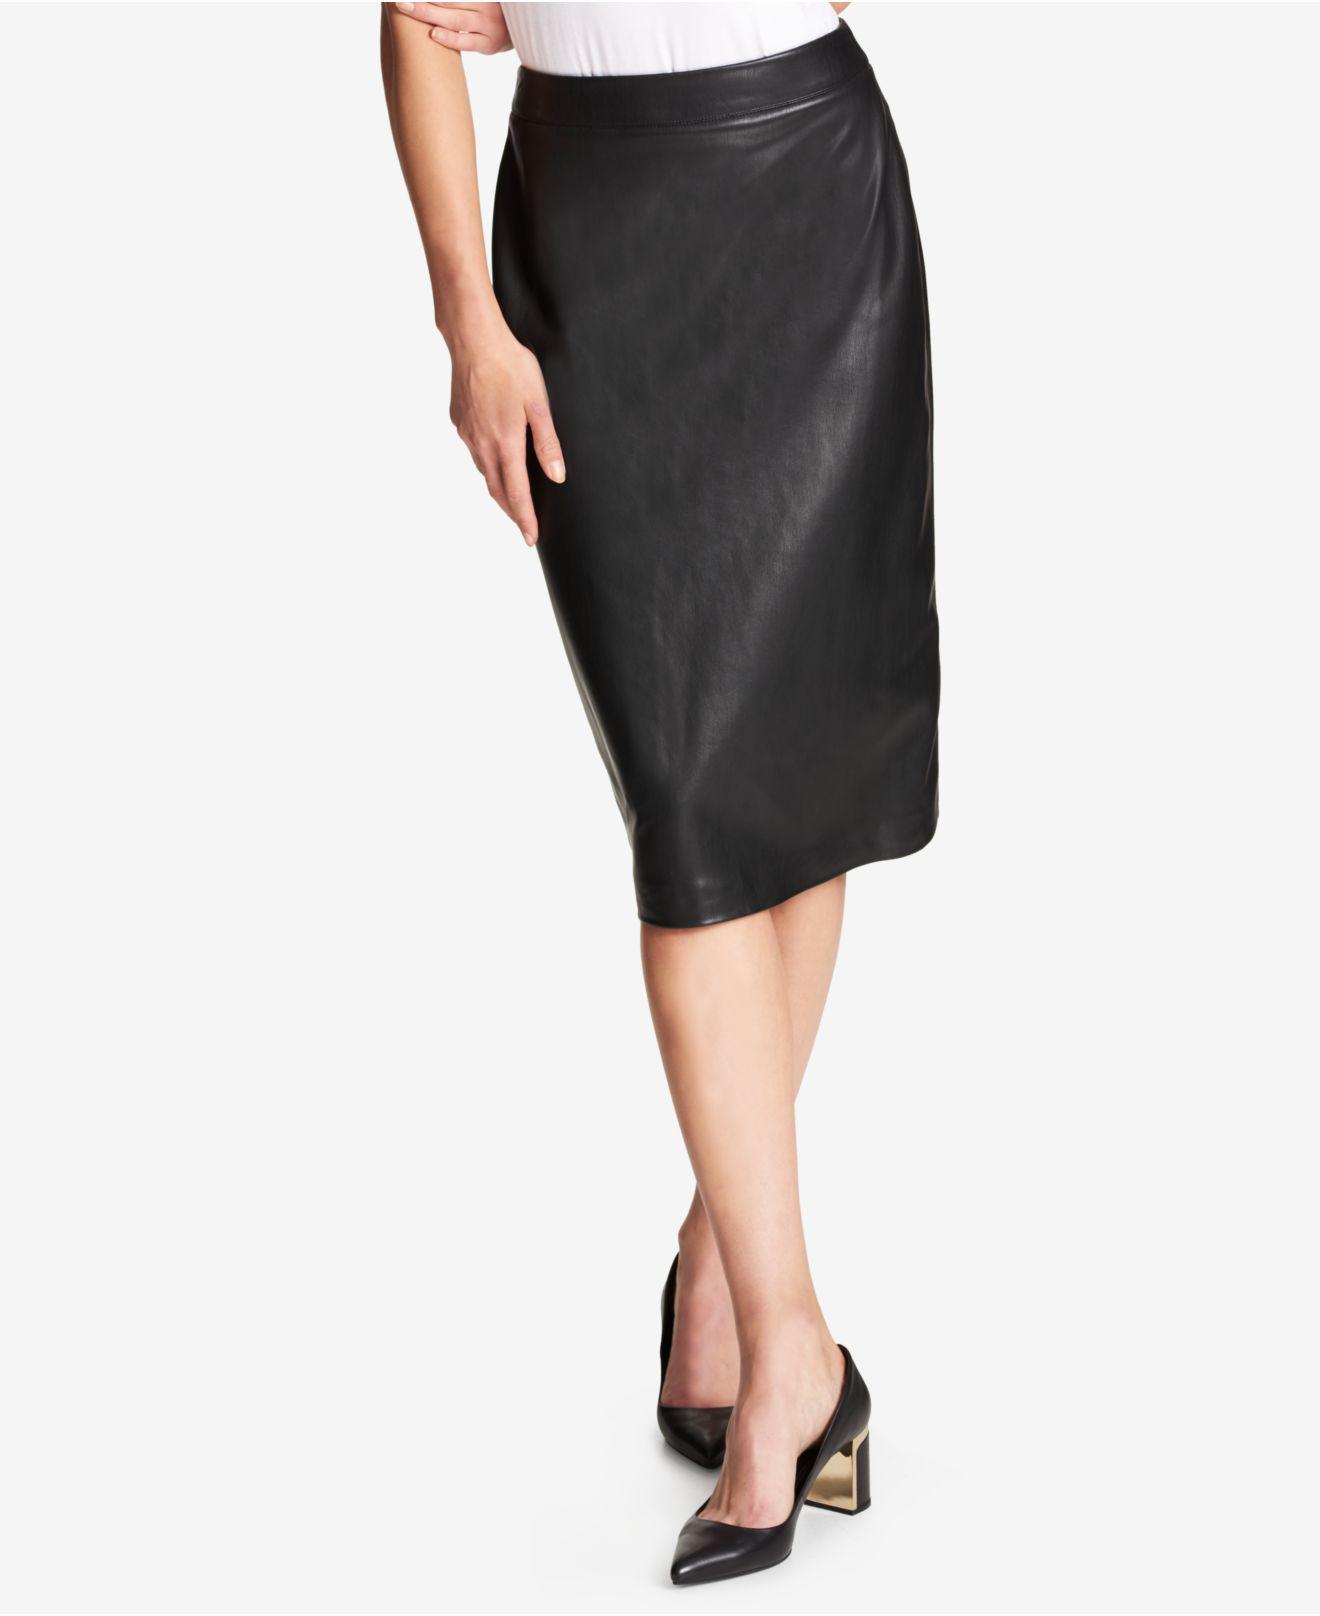 DKNY Faux-leather Pencil Skirt in Black - Lyst